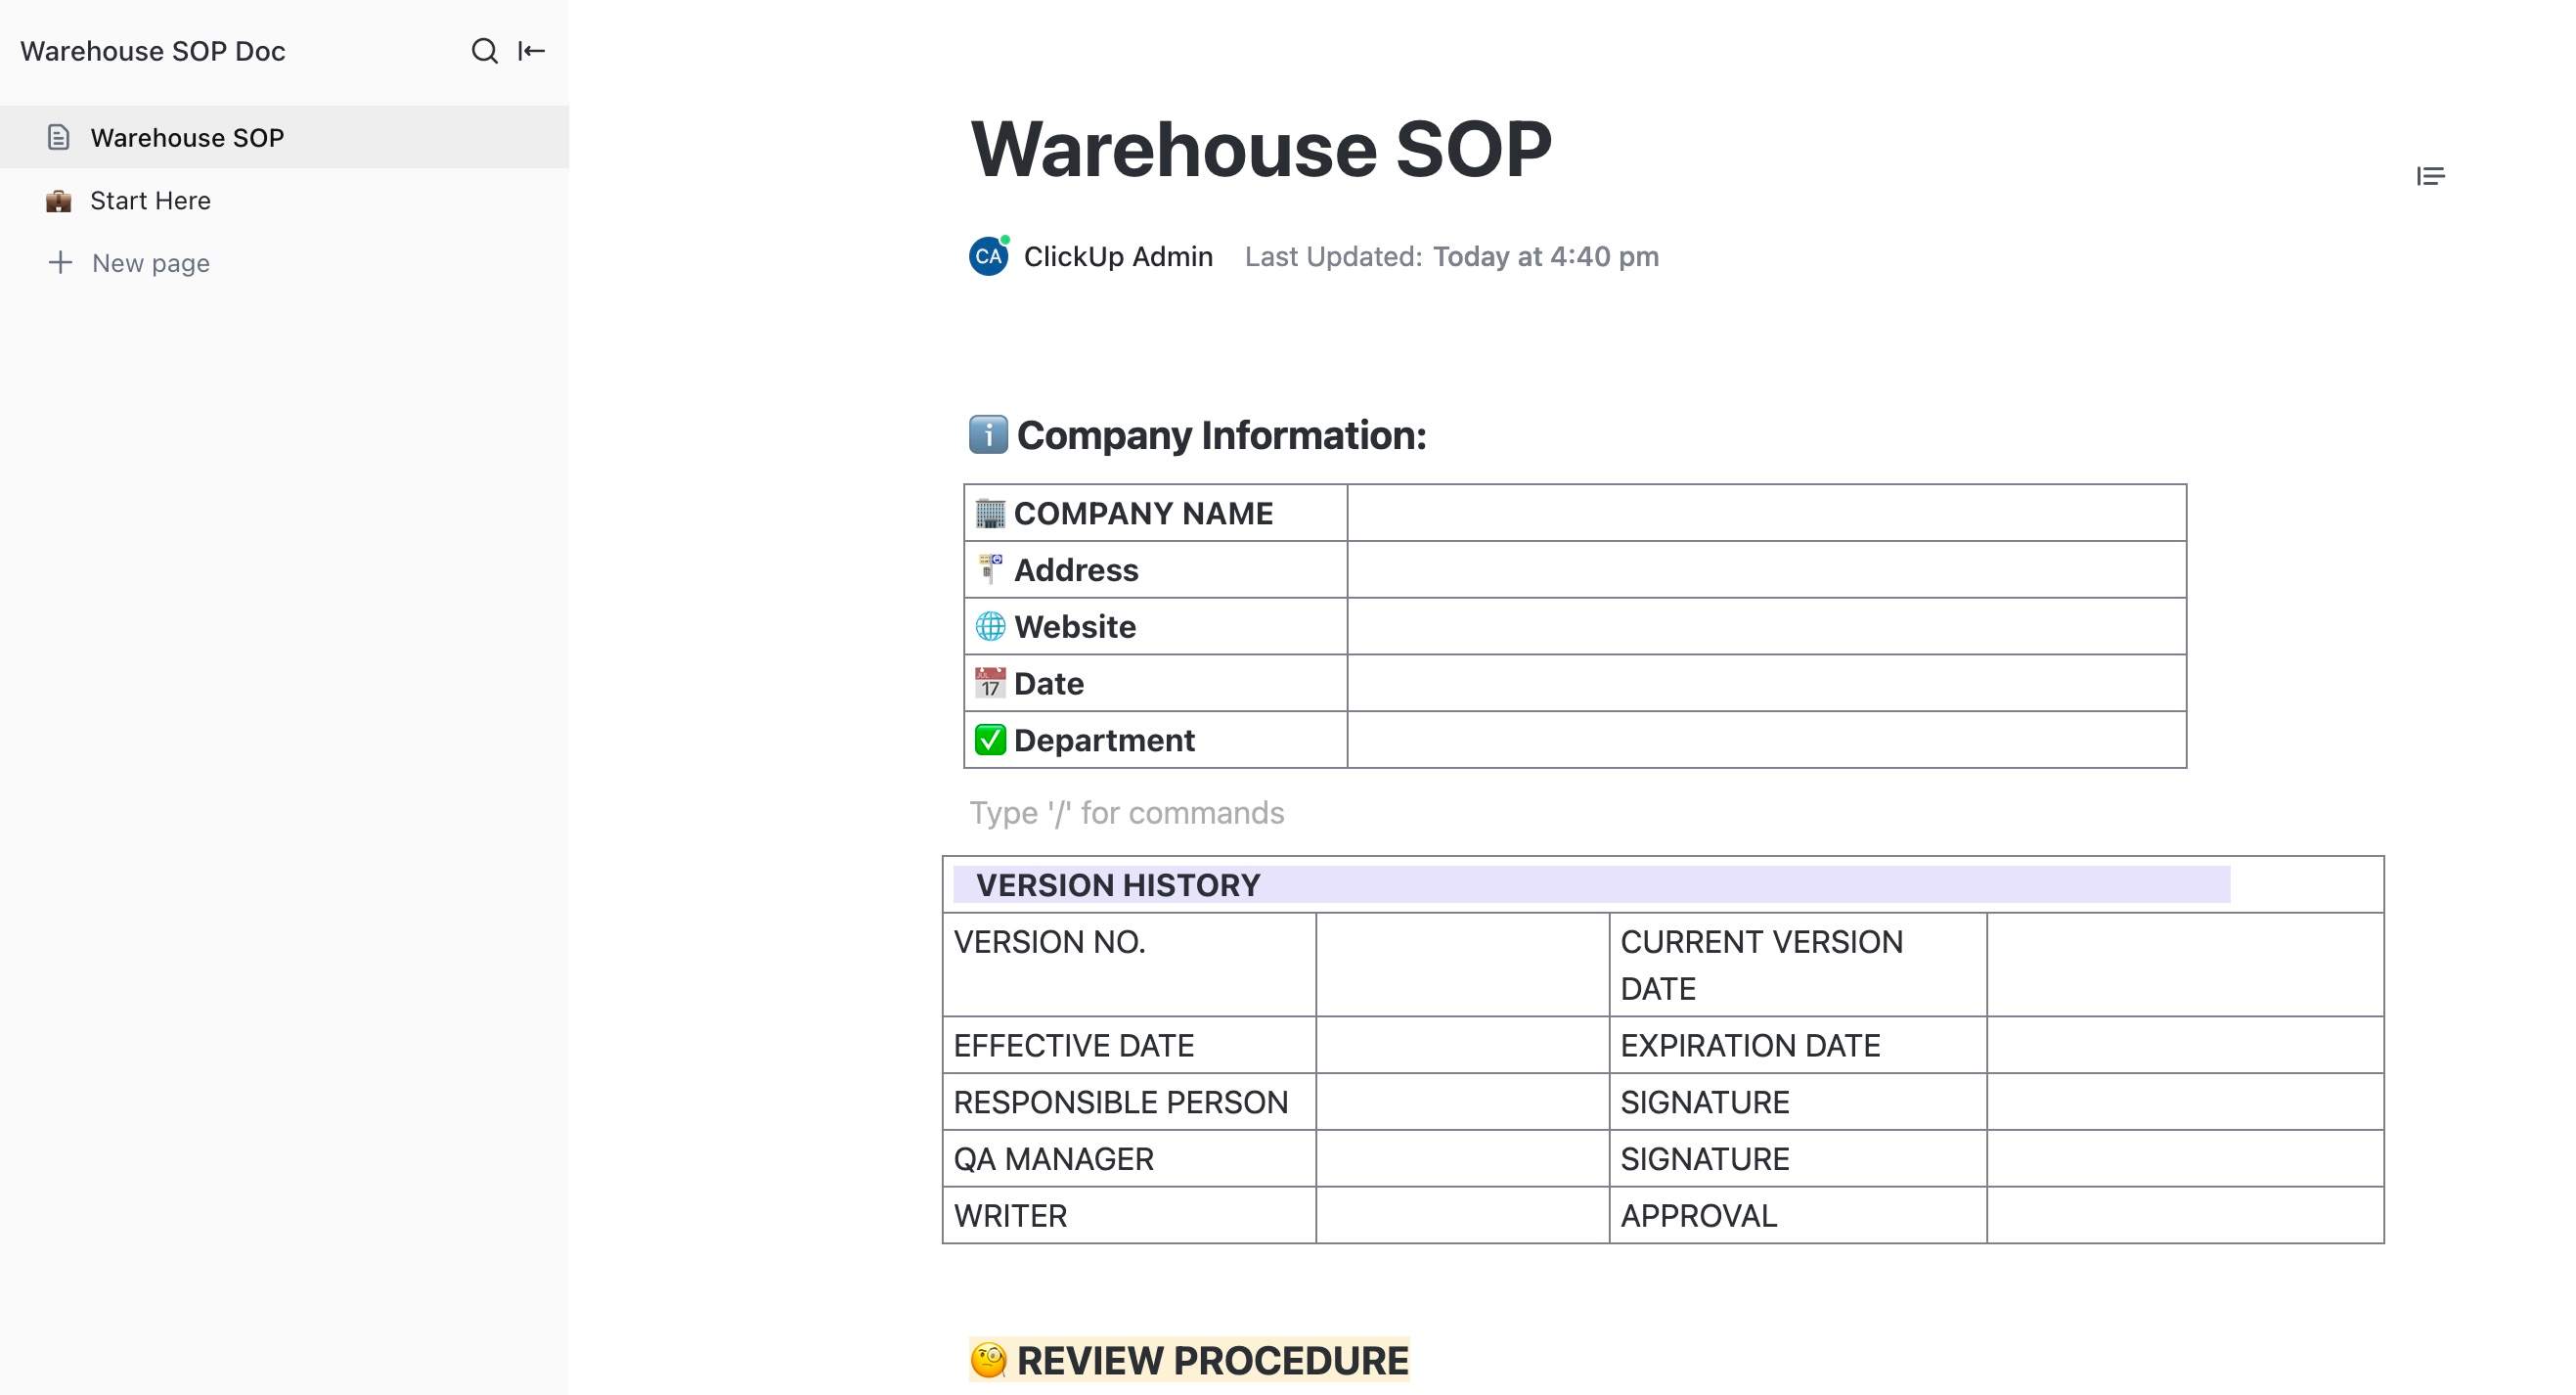 Order and routine are important in any warehouse, but if your facility handles regulated material, well-considered procedures may be necessary for compliance. Use this SOP template doc to detail approved vendors and processes for ordering material, catalog where shipments are received, document how deliveries should be verified before acceptance, and keep track of how paperwork (such as packing slips and labels) is processed.